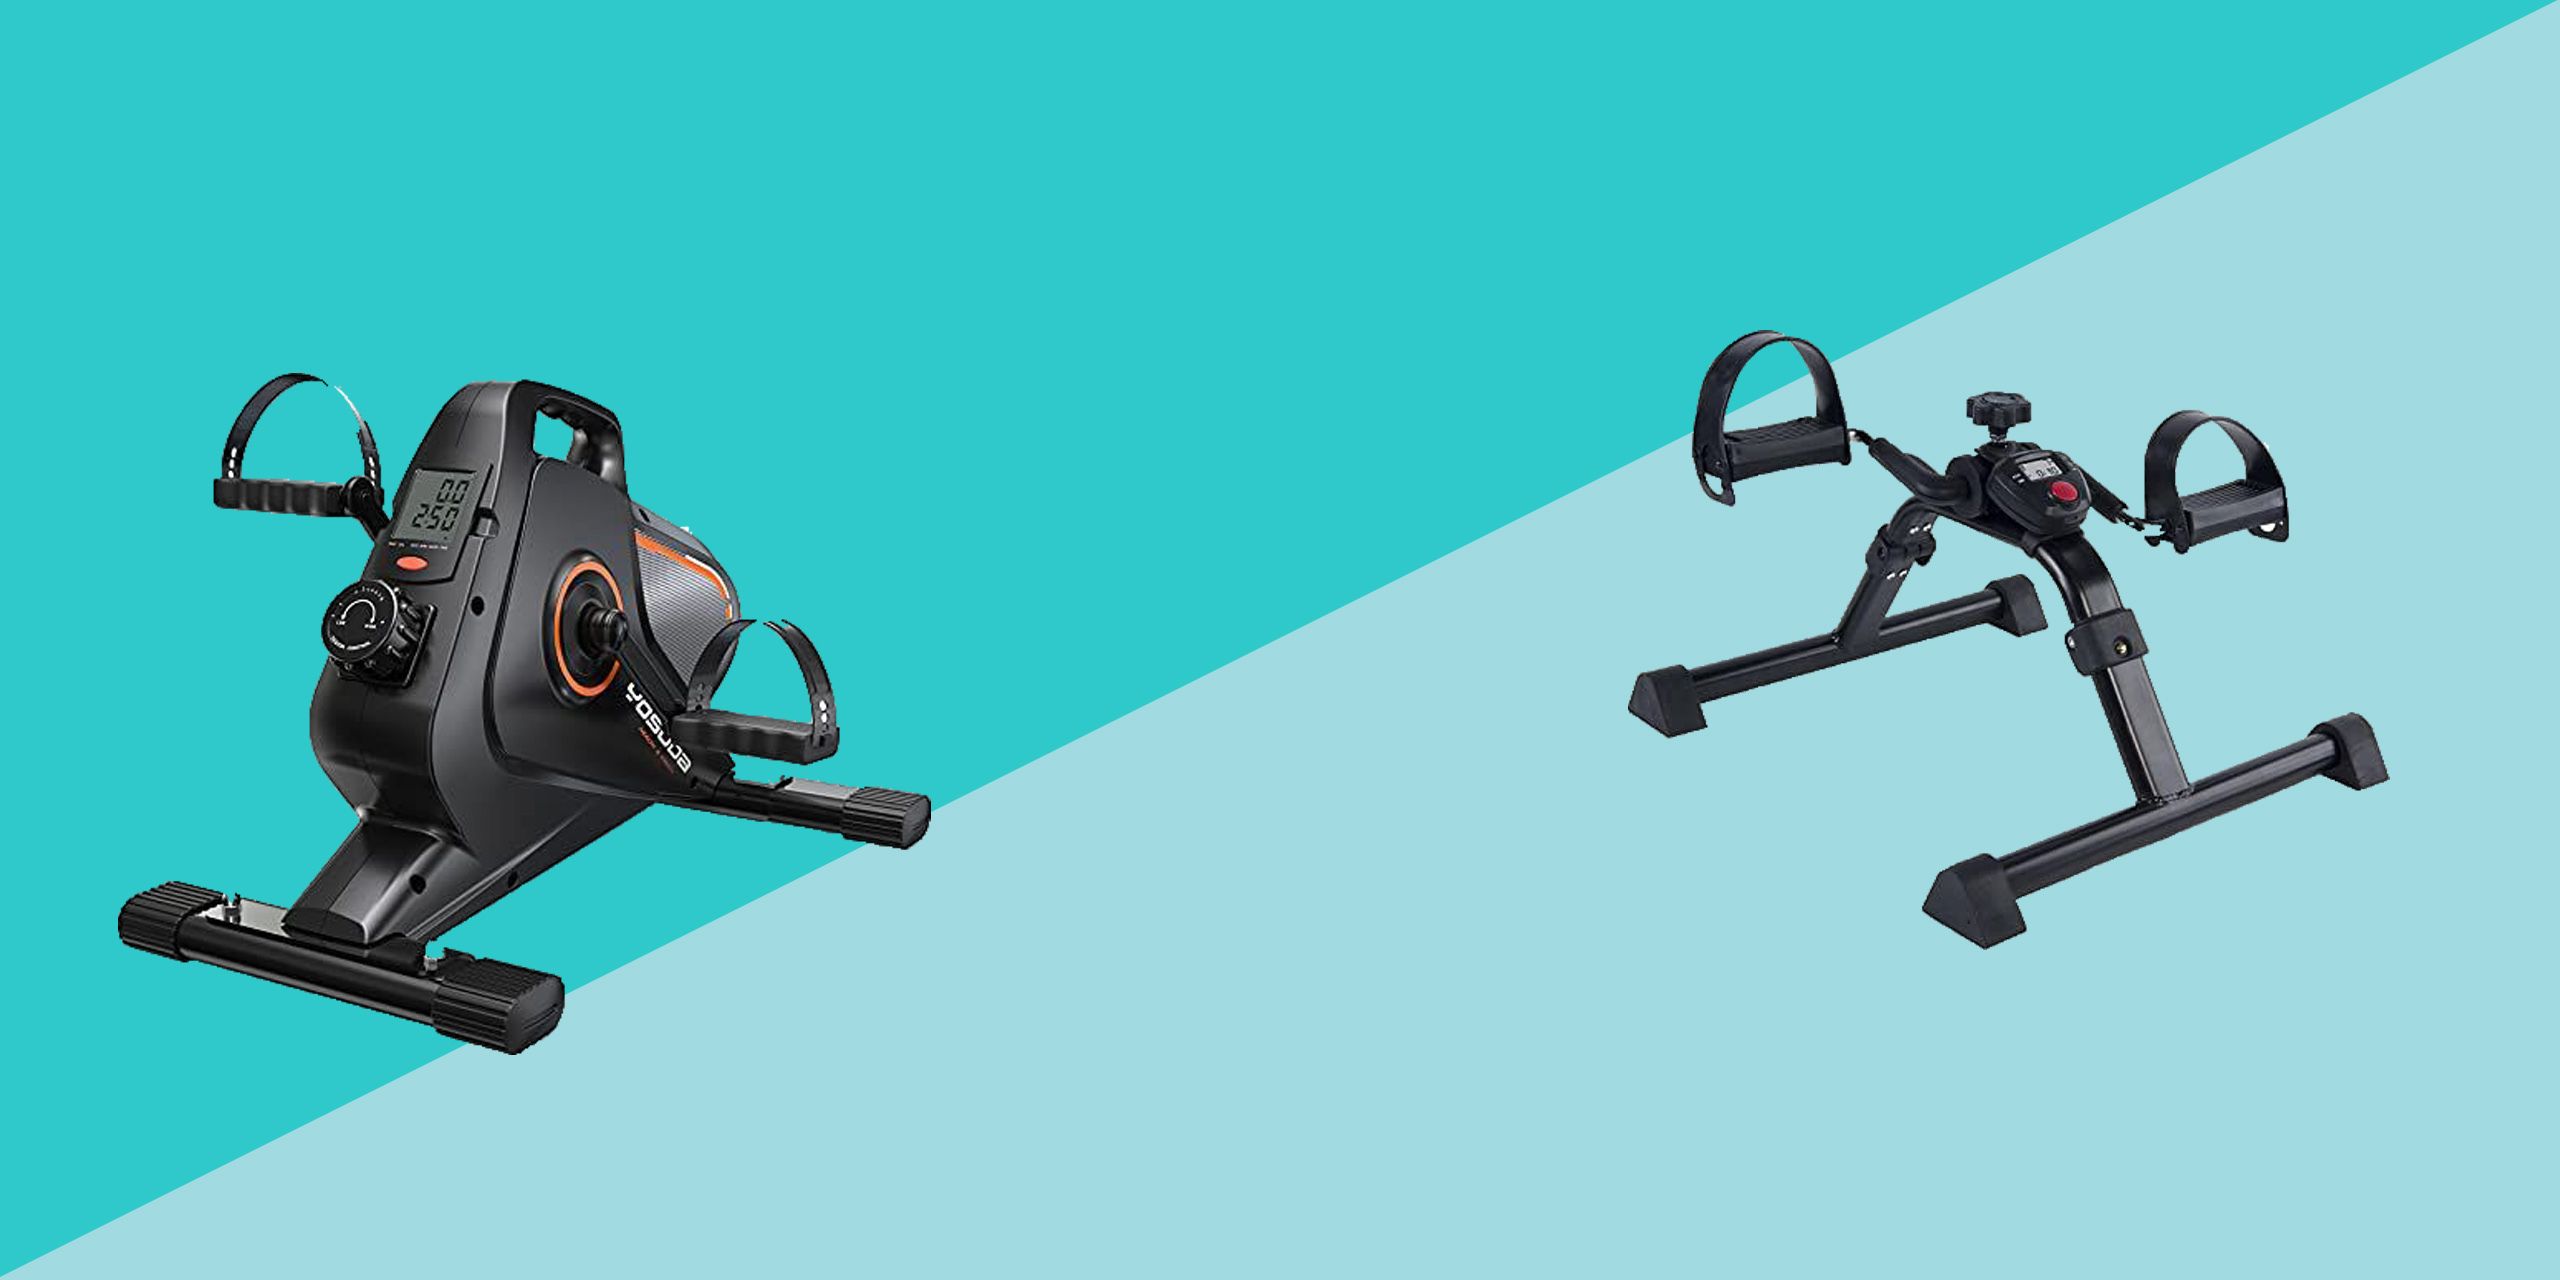 Can I use an under-desk bike if I have back problems?